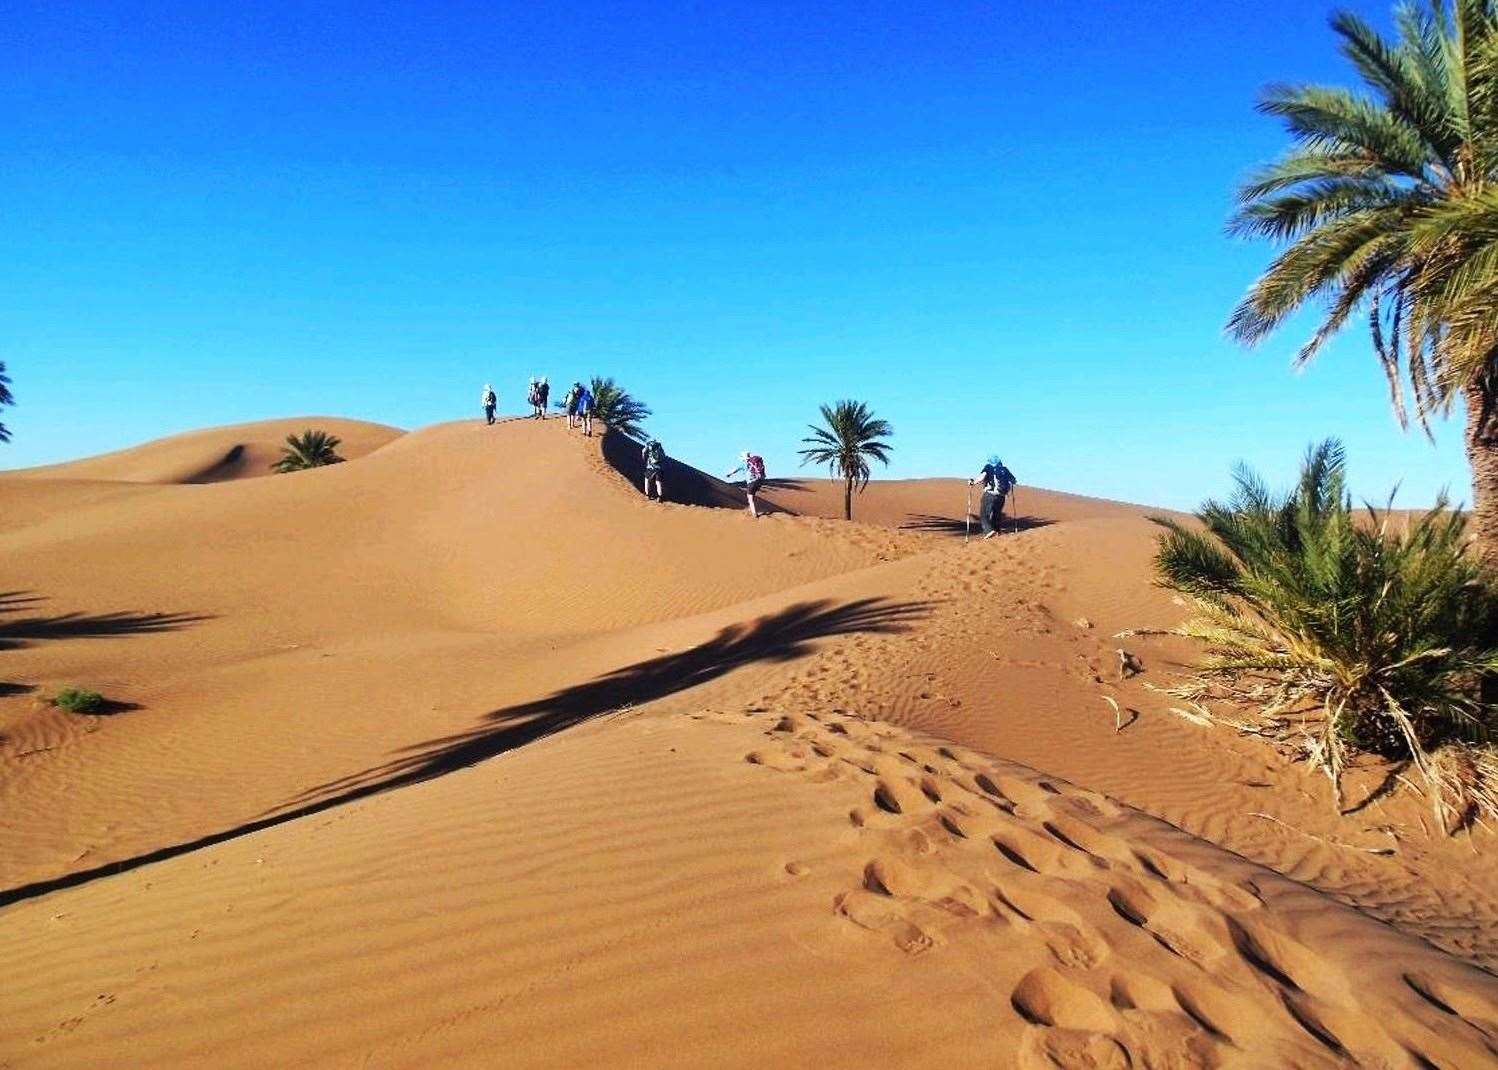 Local guides will steer the team clear of hidden dangers such as scorpions and snakes on the expedition across the Sahara.